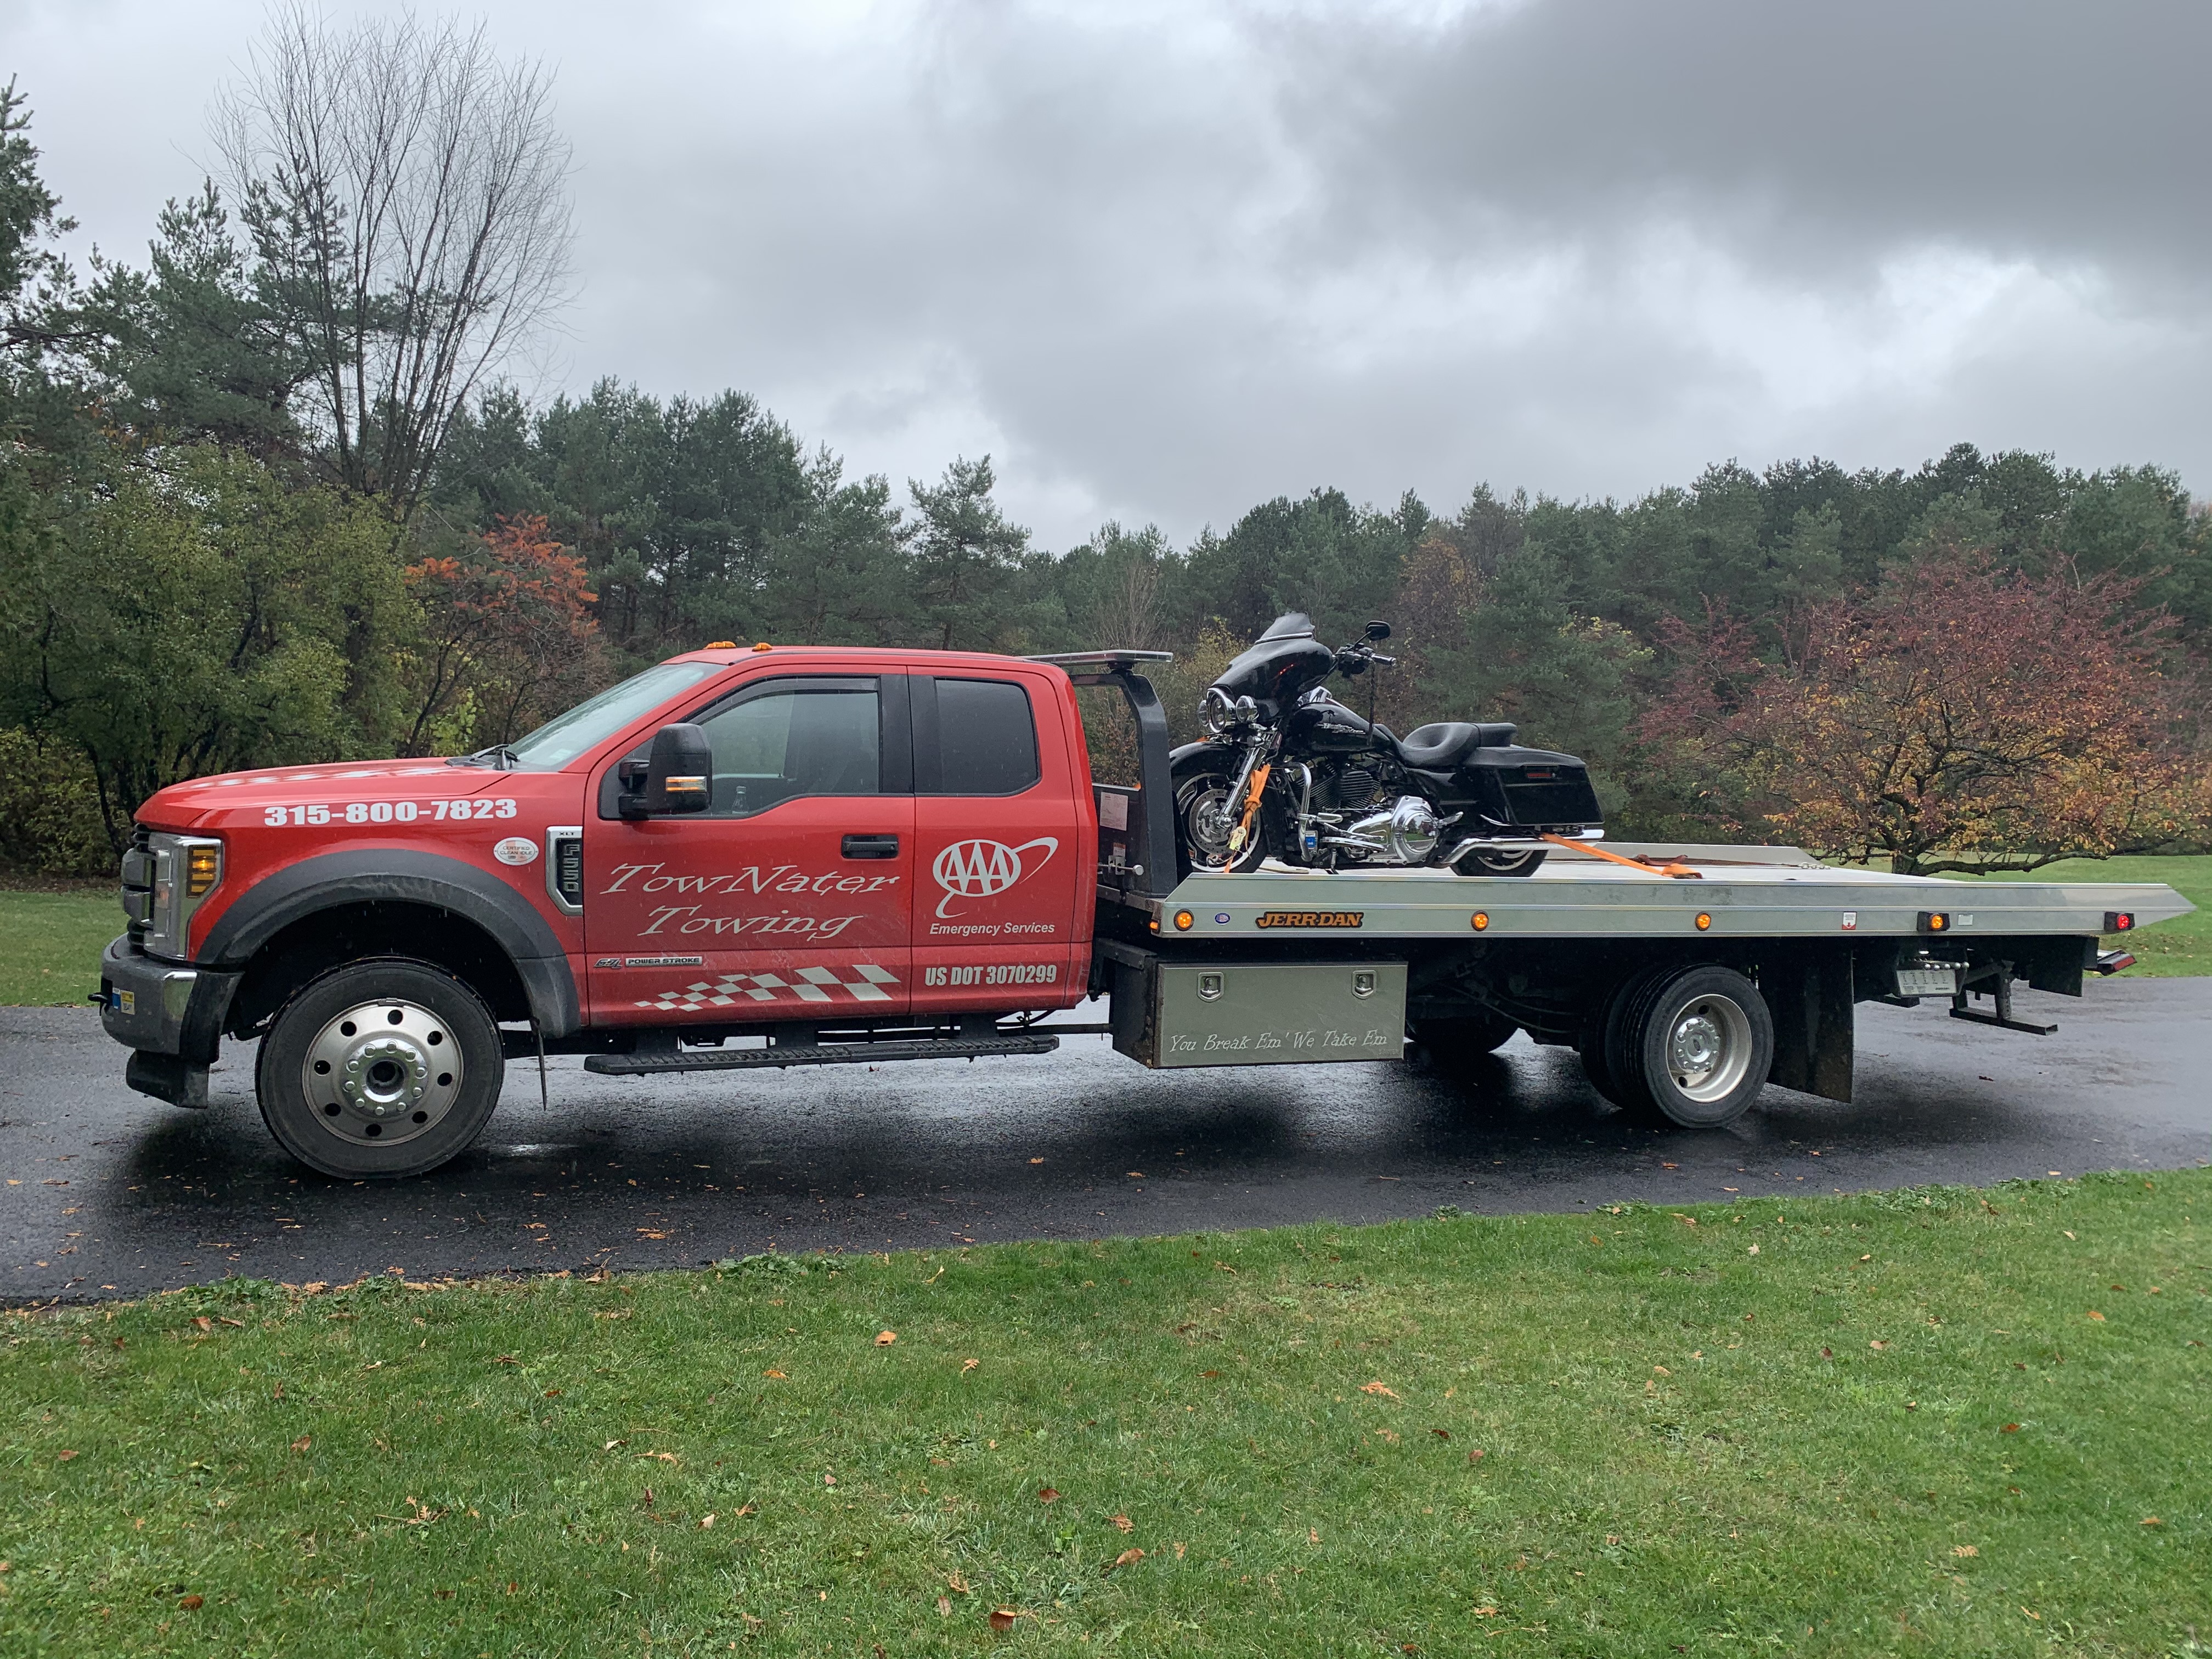 Service Description for Motorcycle Towing Image